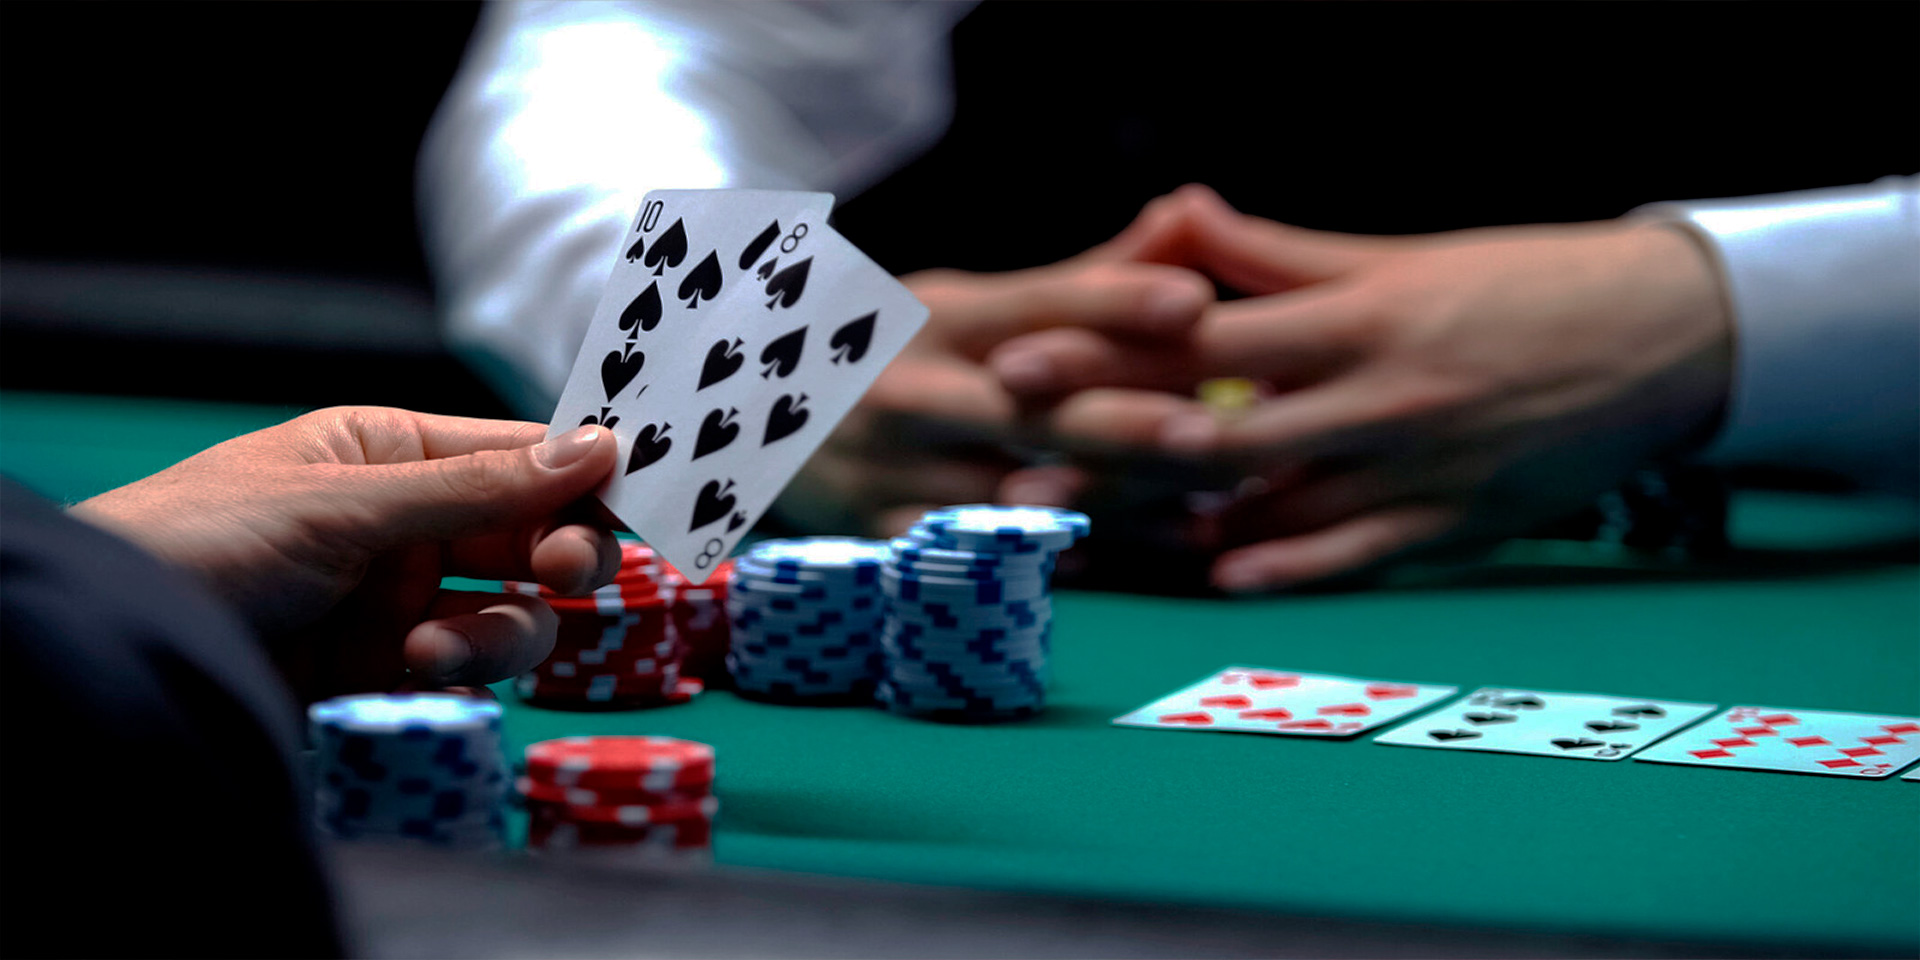 How to participate in poker tournaments